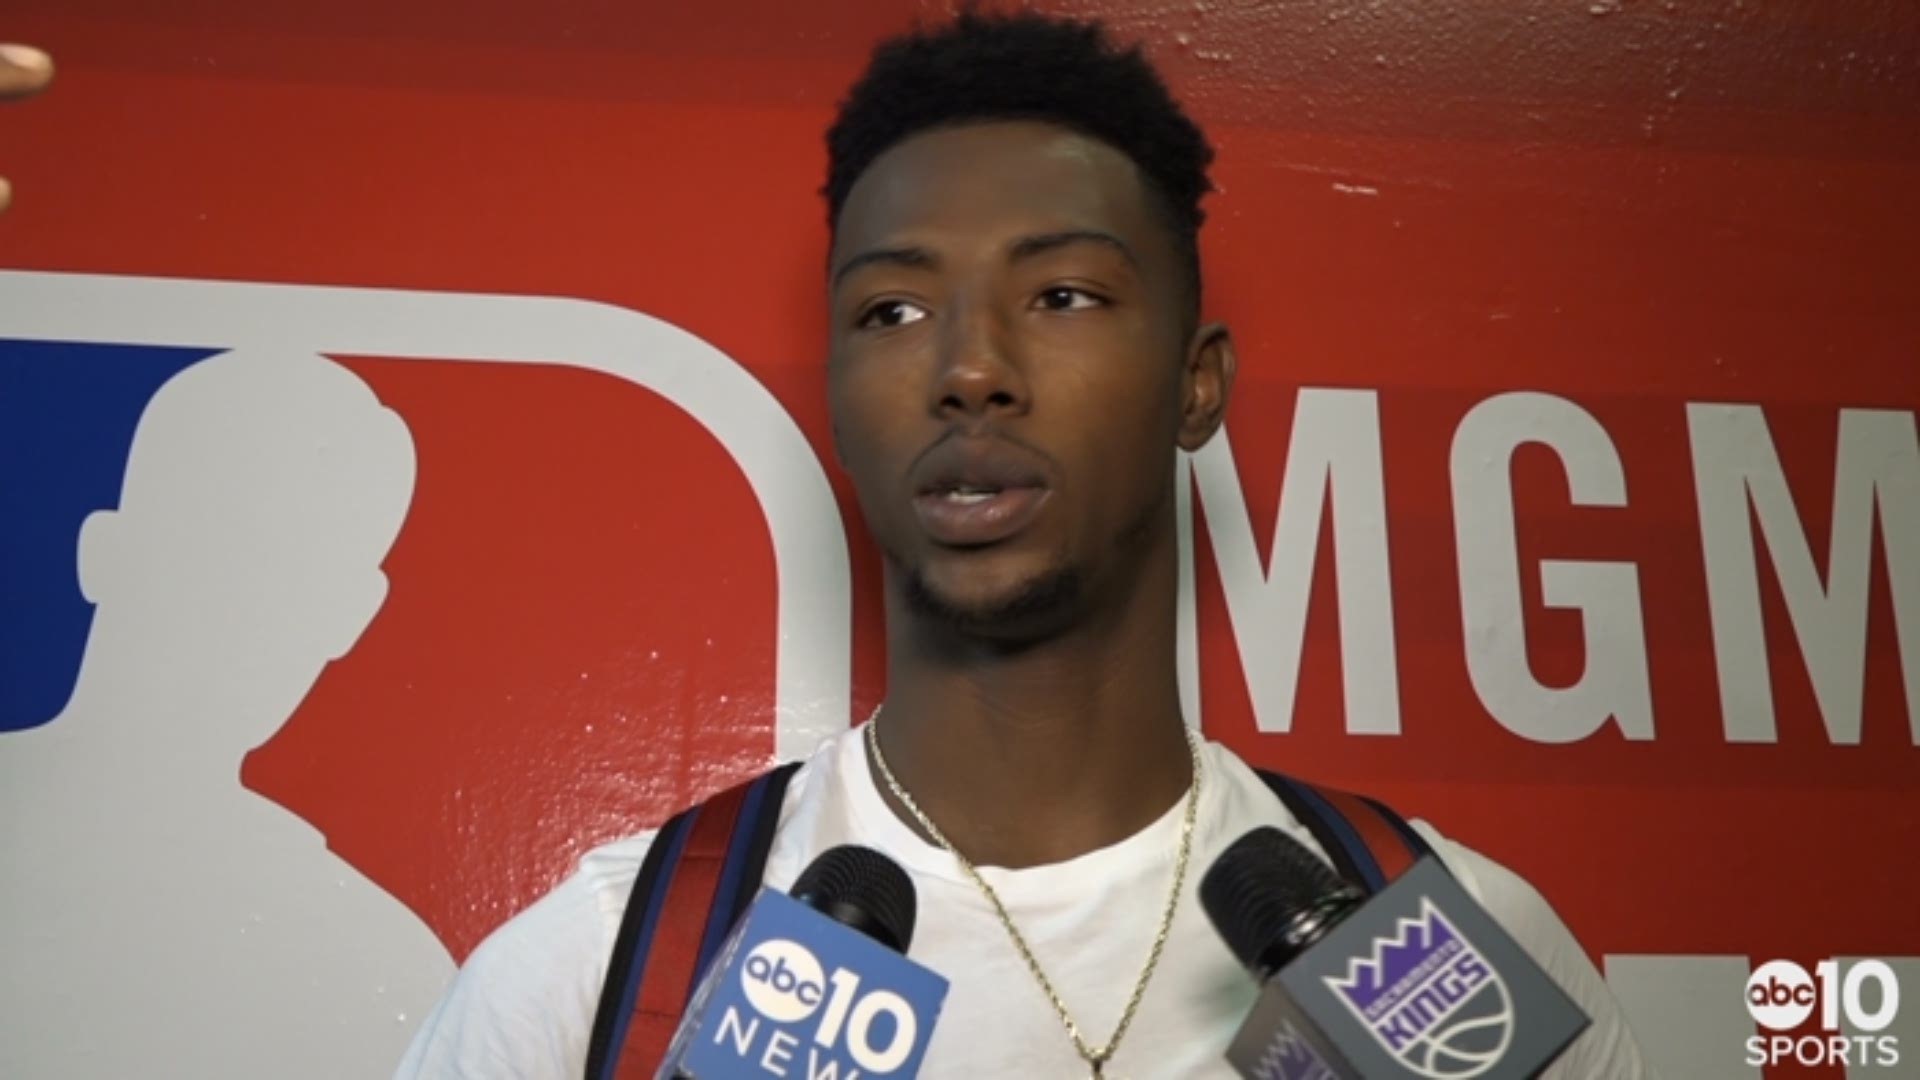 Sacramento Kings rookie Harry Giles talks about Wednesday's loss to the Cleveland Cavaliers in Las Vegas during summer league and being ejected after picking up two technicals in the loss.